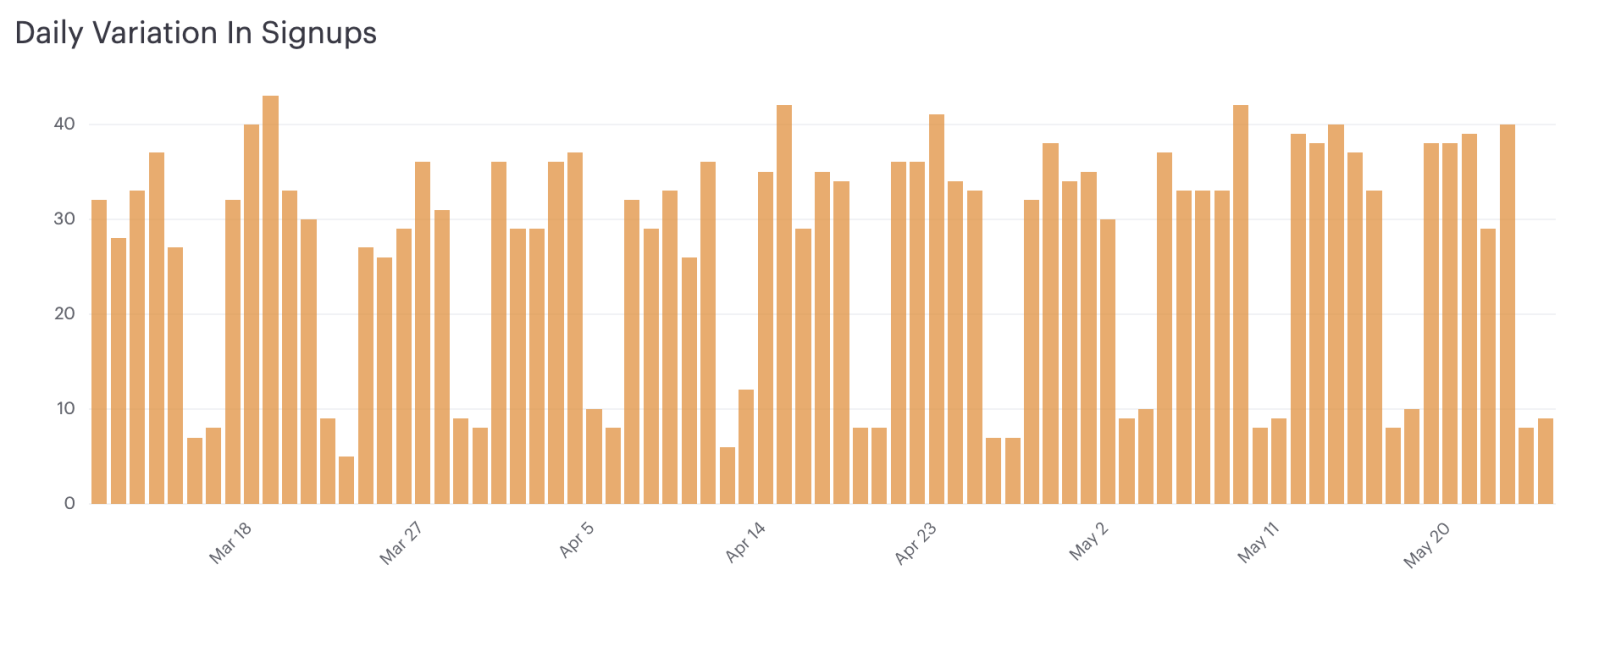 date_trunc visualization (Daily Variation In Signups)